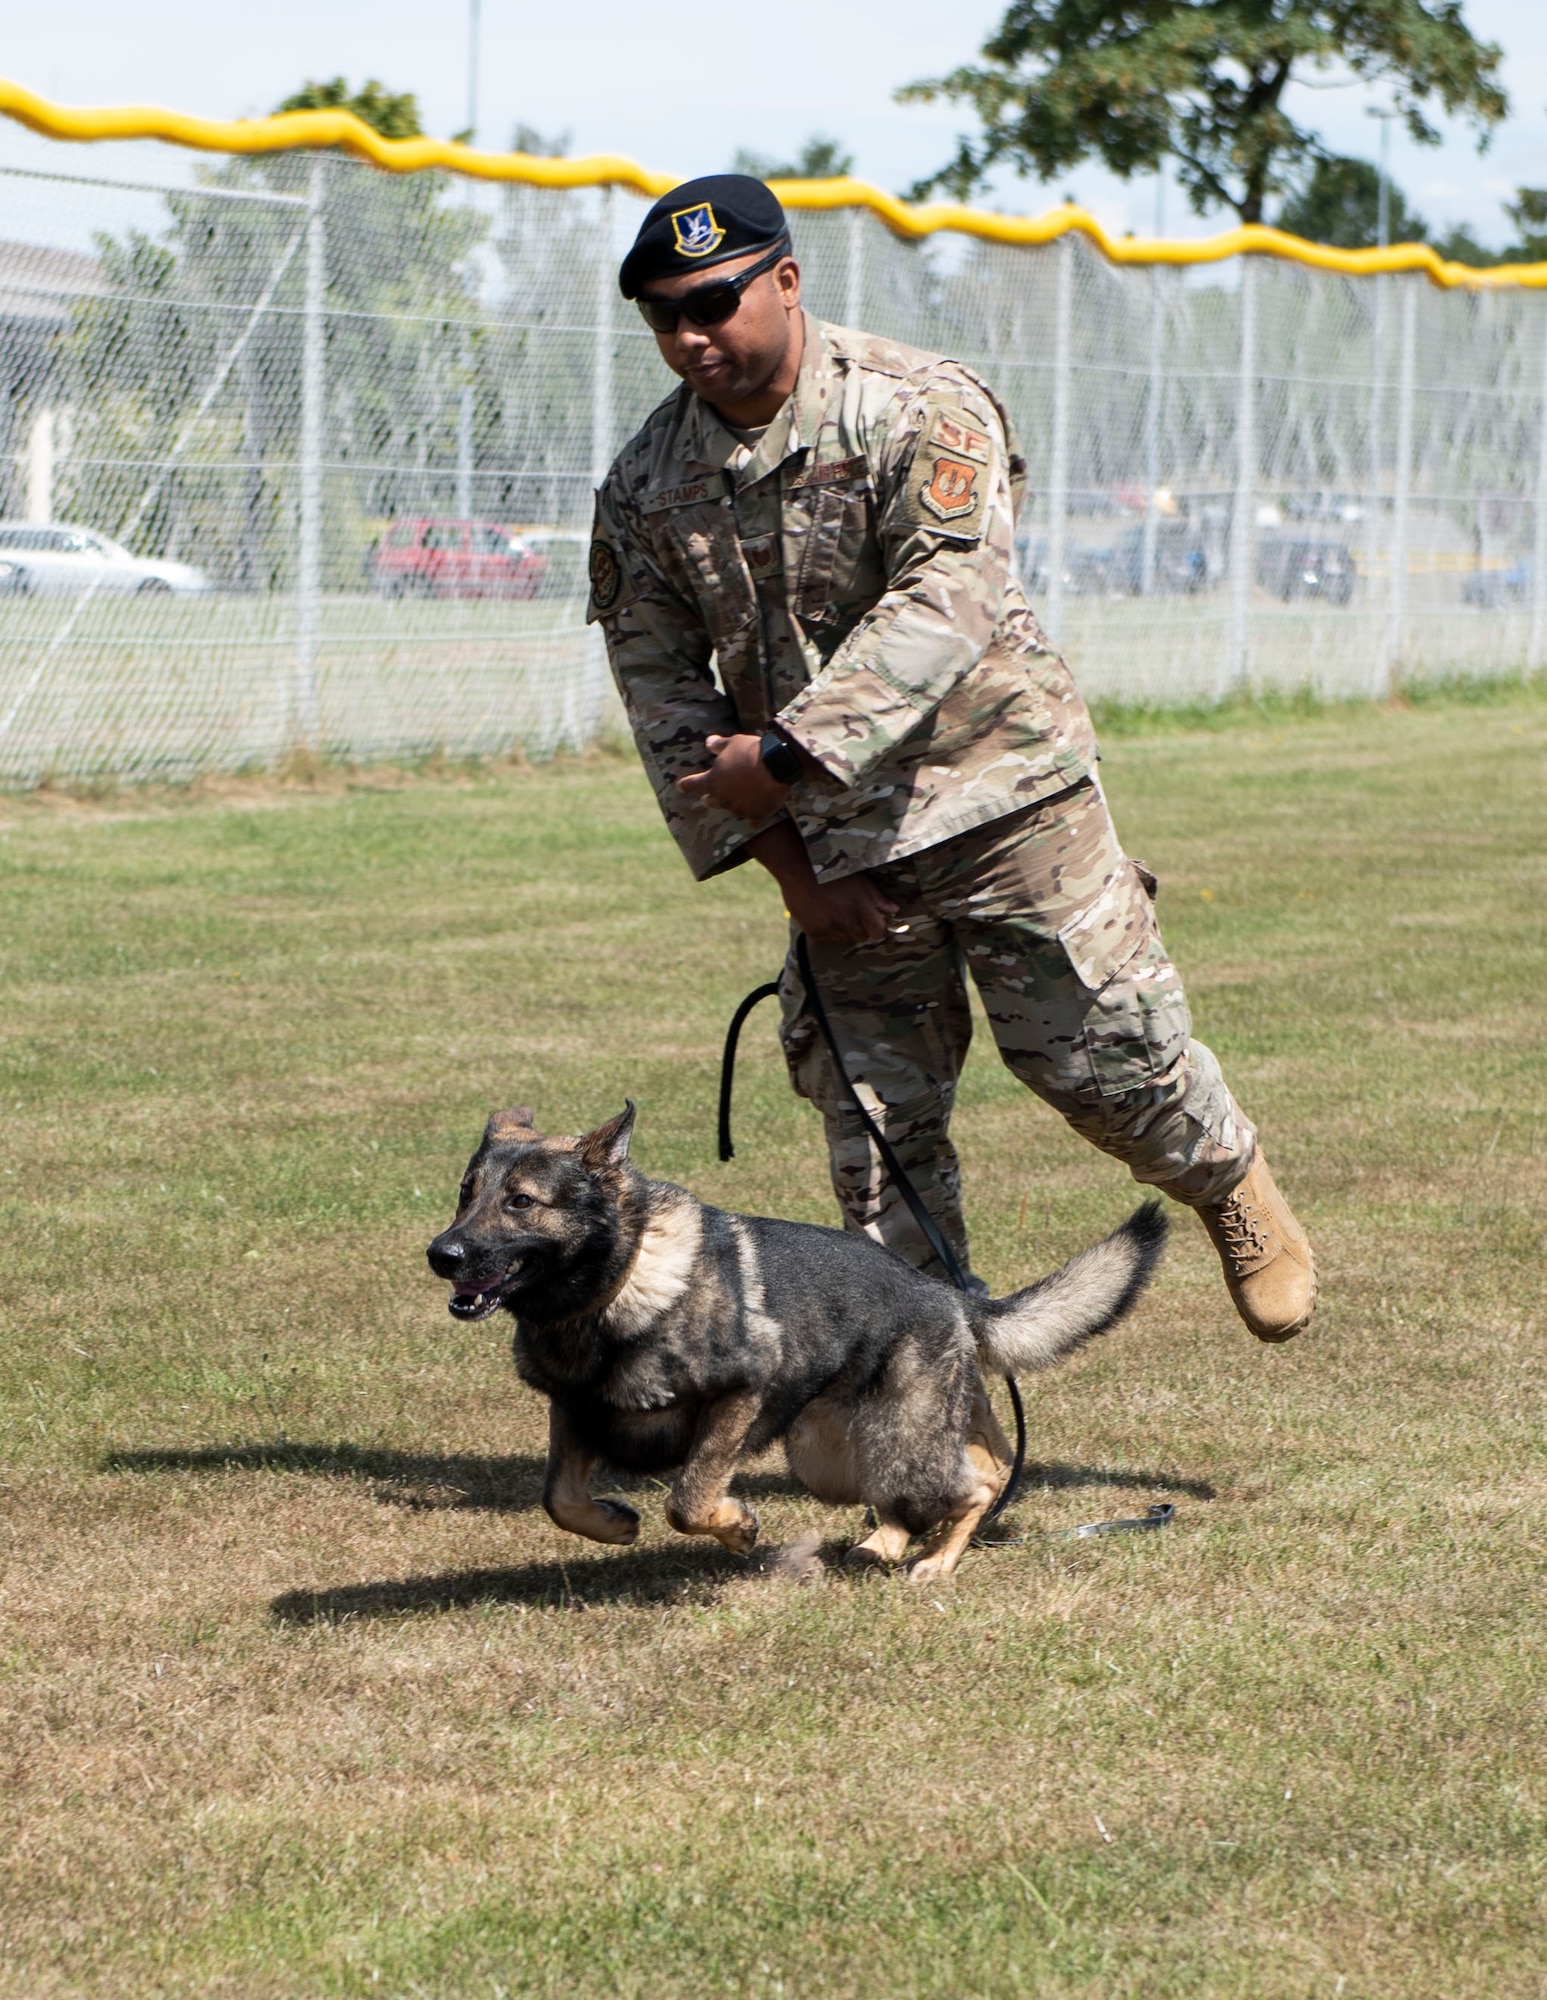 U.S. Air Force Tech. Sgt. Dontae Stamps, 52nd Security Forces Squadron military working dog handler, releases Axel, an MWD, at Spangdahlem Air Base, Germany, July 22, 2020. Stamps and Axel worked together to demonstrate preventing an intruder from entering their post. (U.S. Air Force photo by Senior Airman Melody W. Howley)